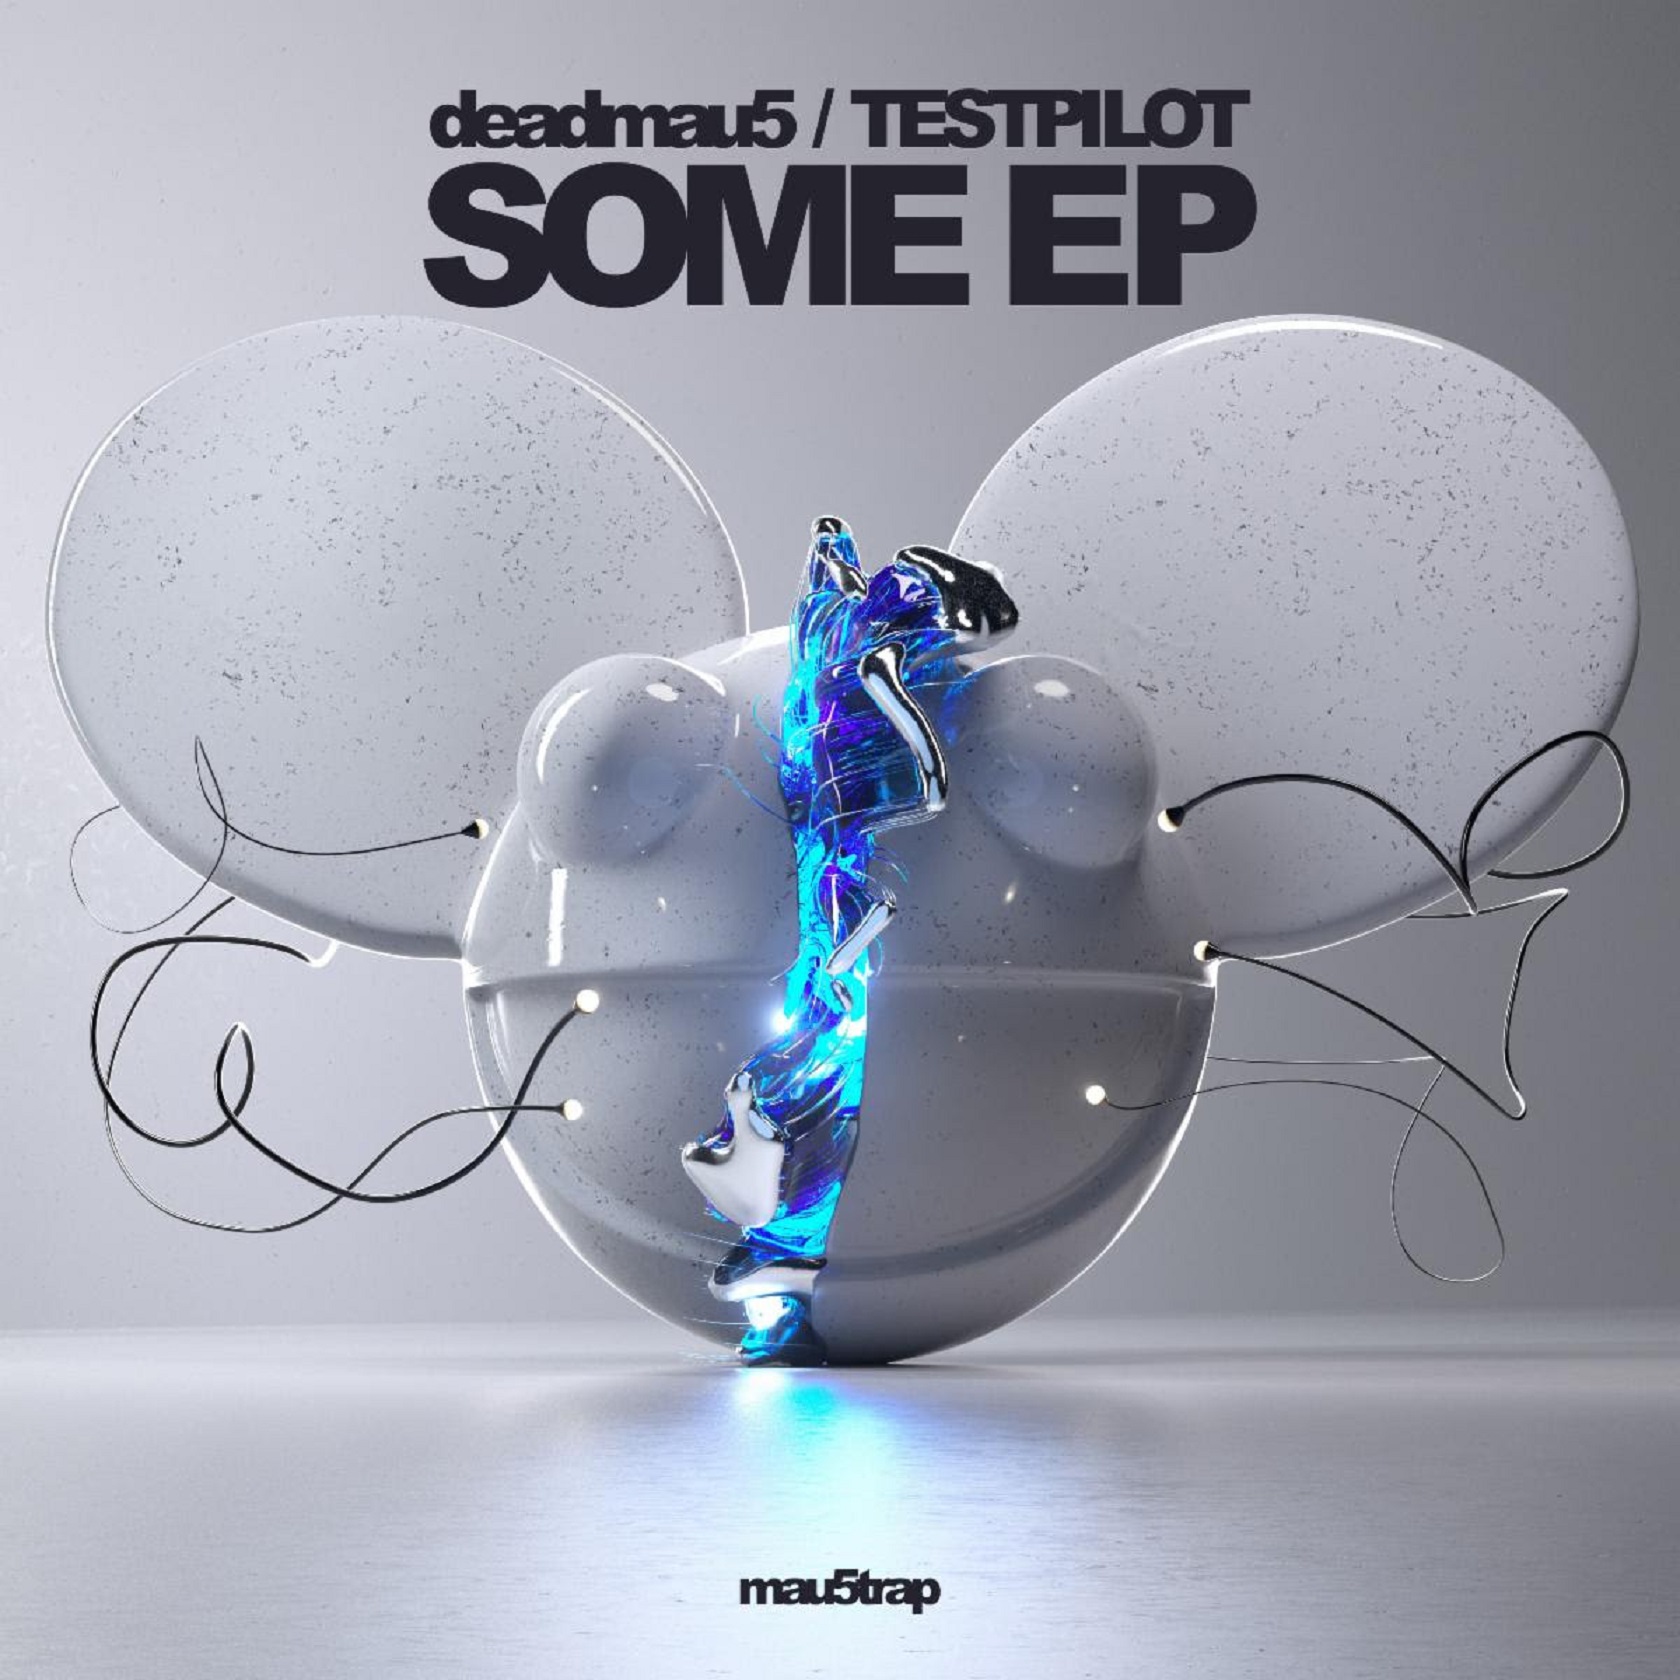 deadmau5 ‘some ep’ OUT TODAY, JULY 19 ON mau5trap